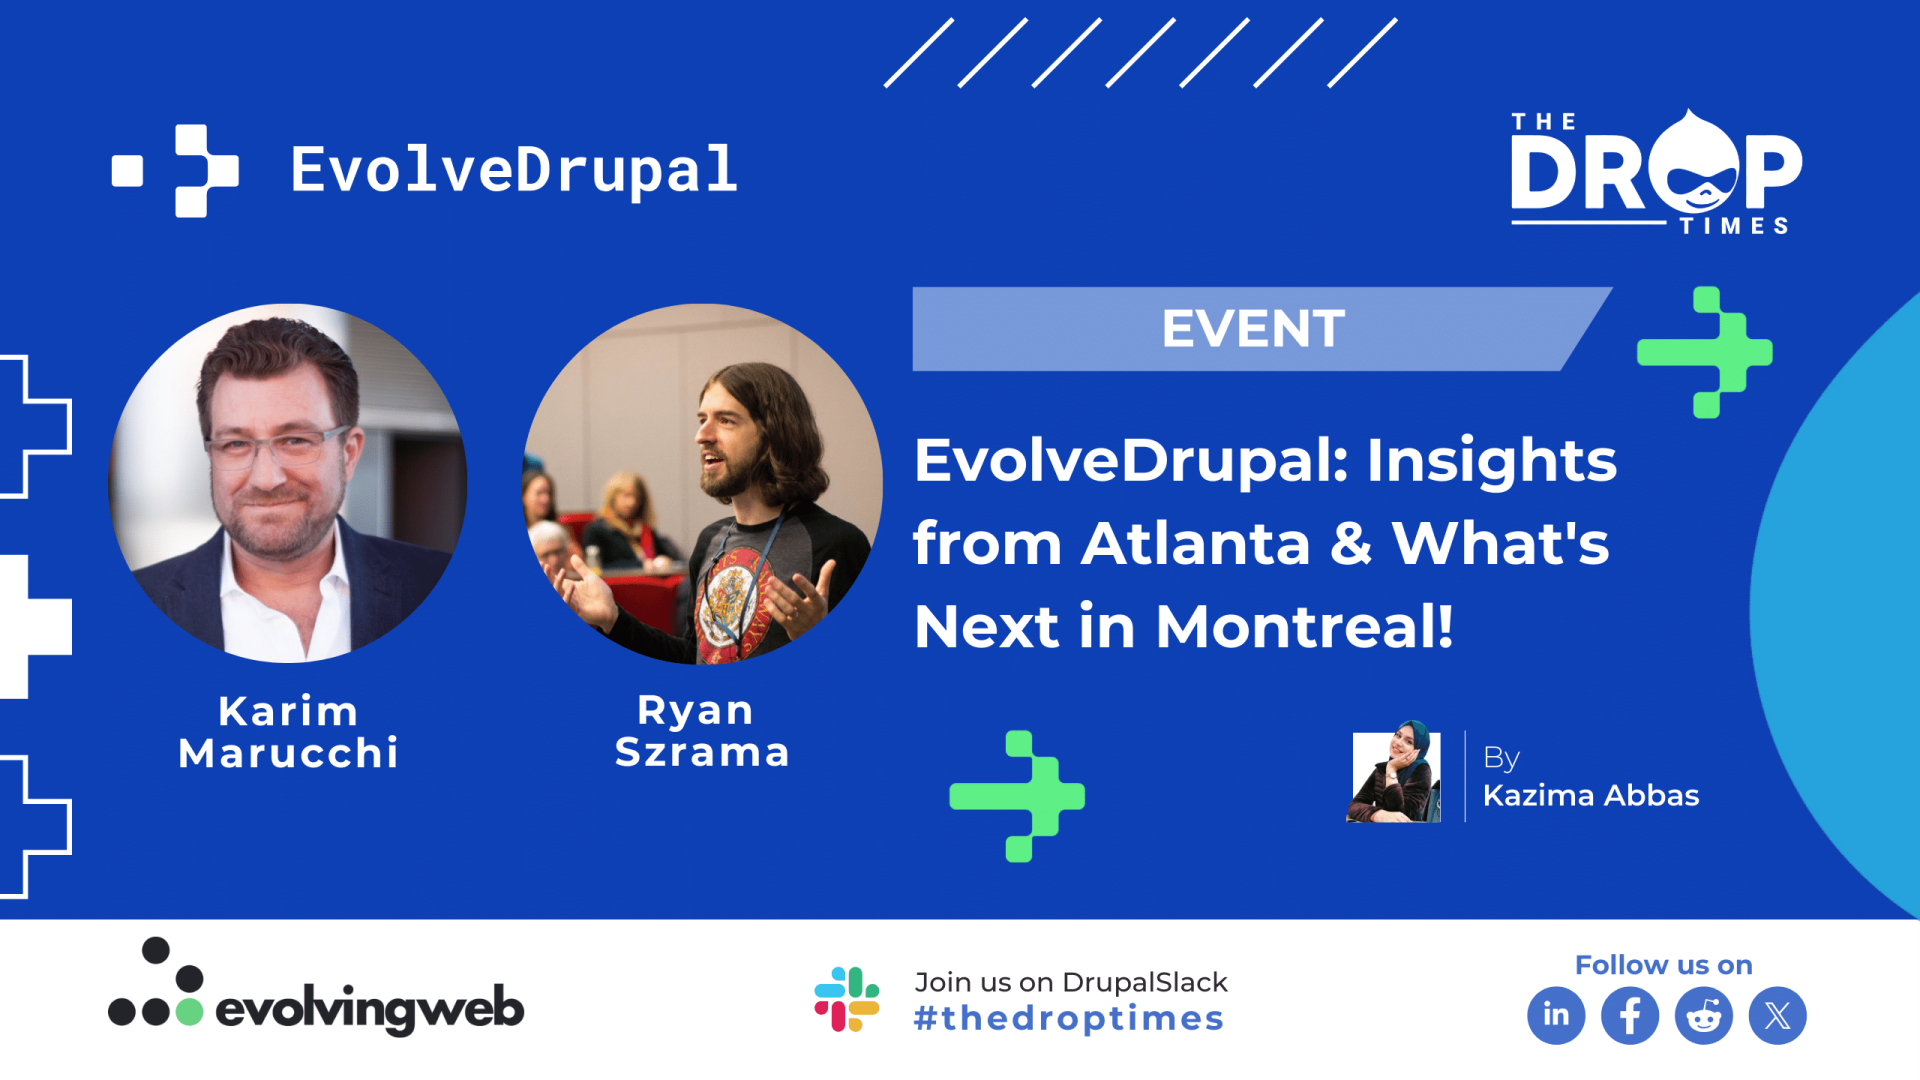 EvolveDrupal: Insights from Atlanta & What's Next in Montreal!